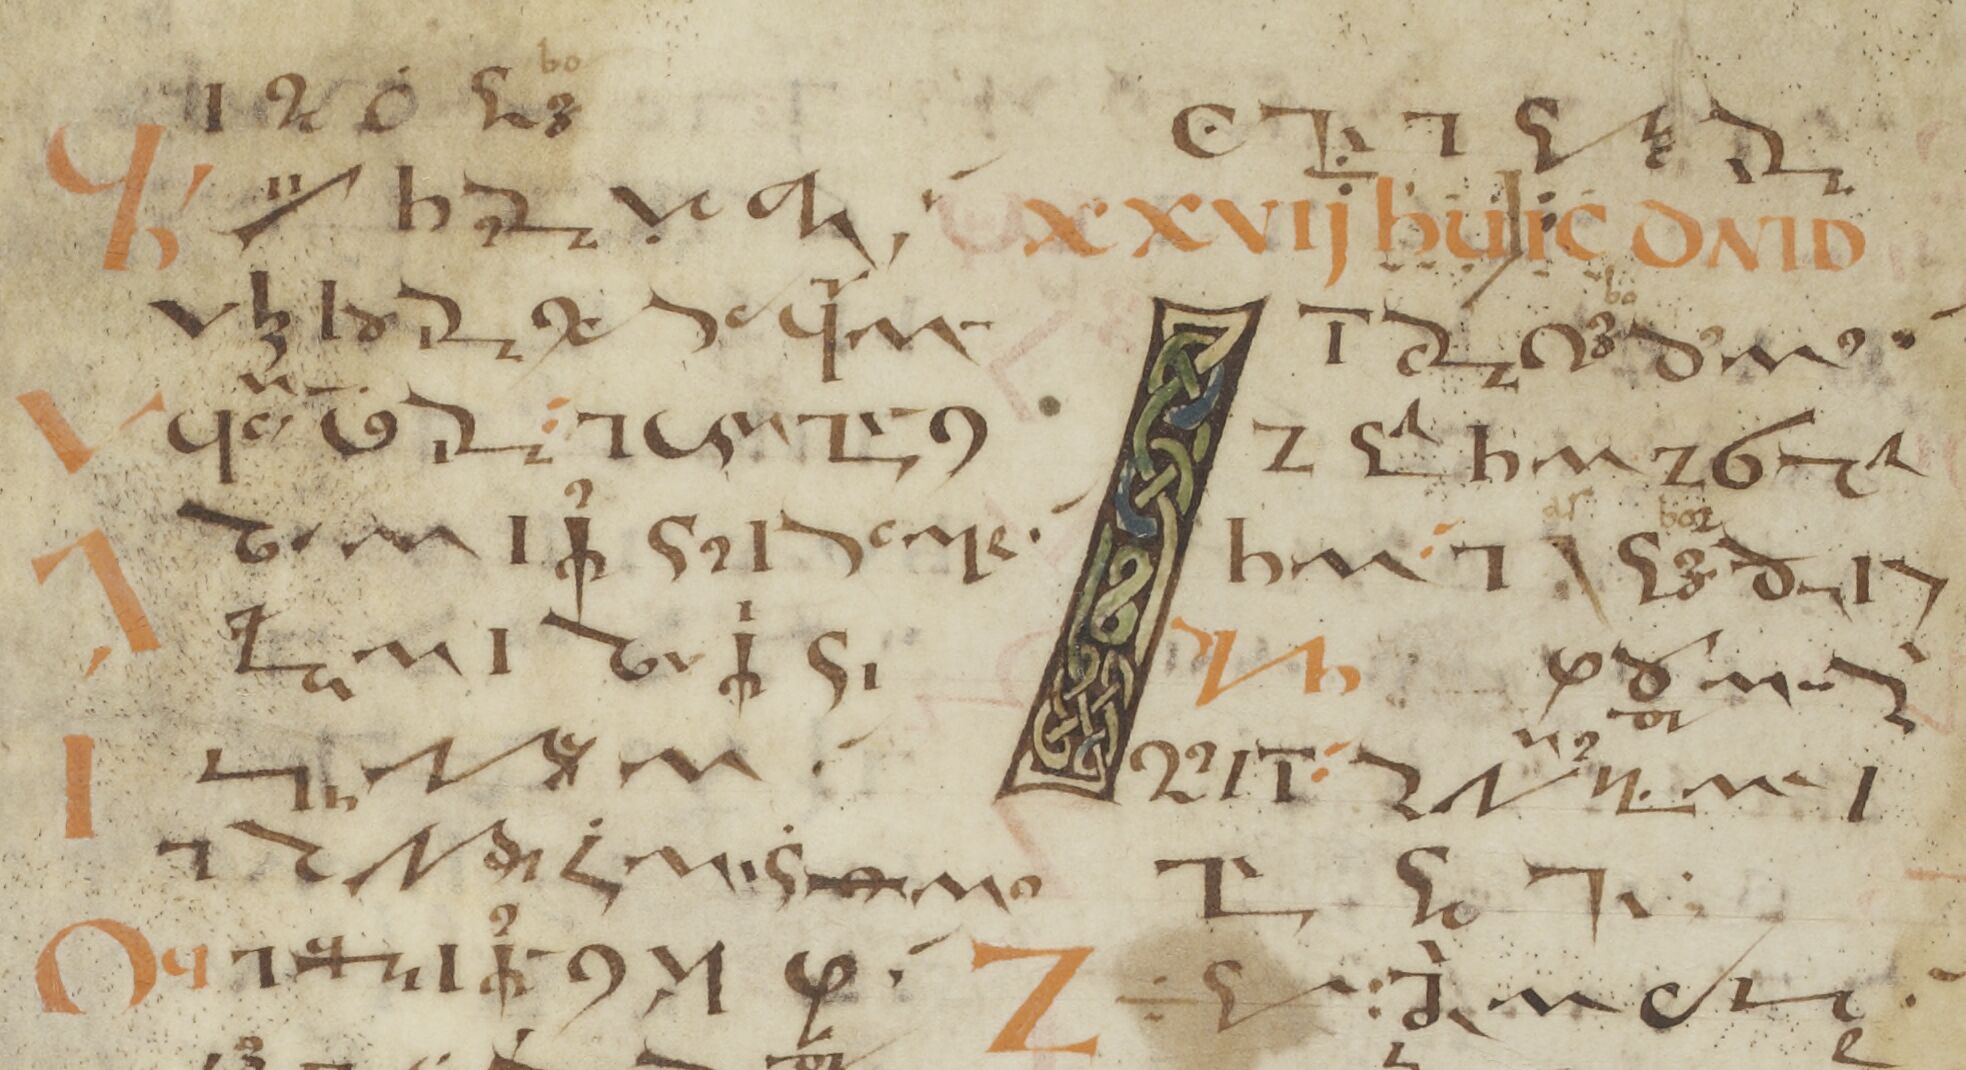 Deciphering medieval shorthand – can a digital tool solve the ‘Tironian Notes’?